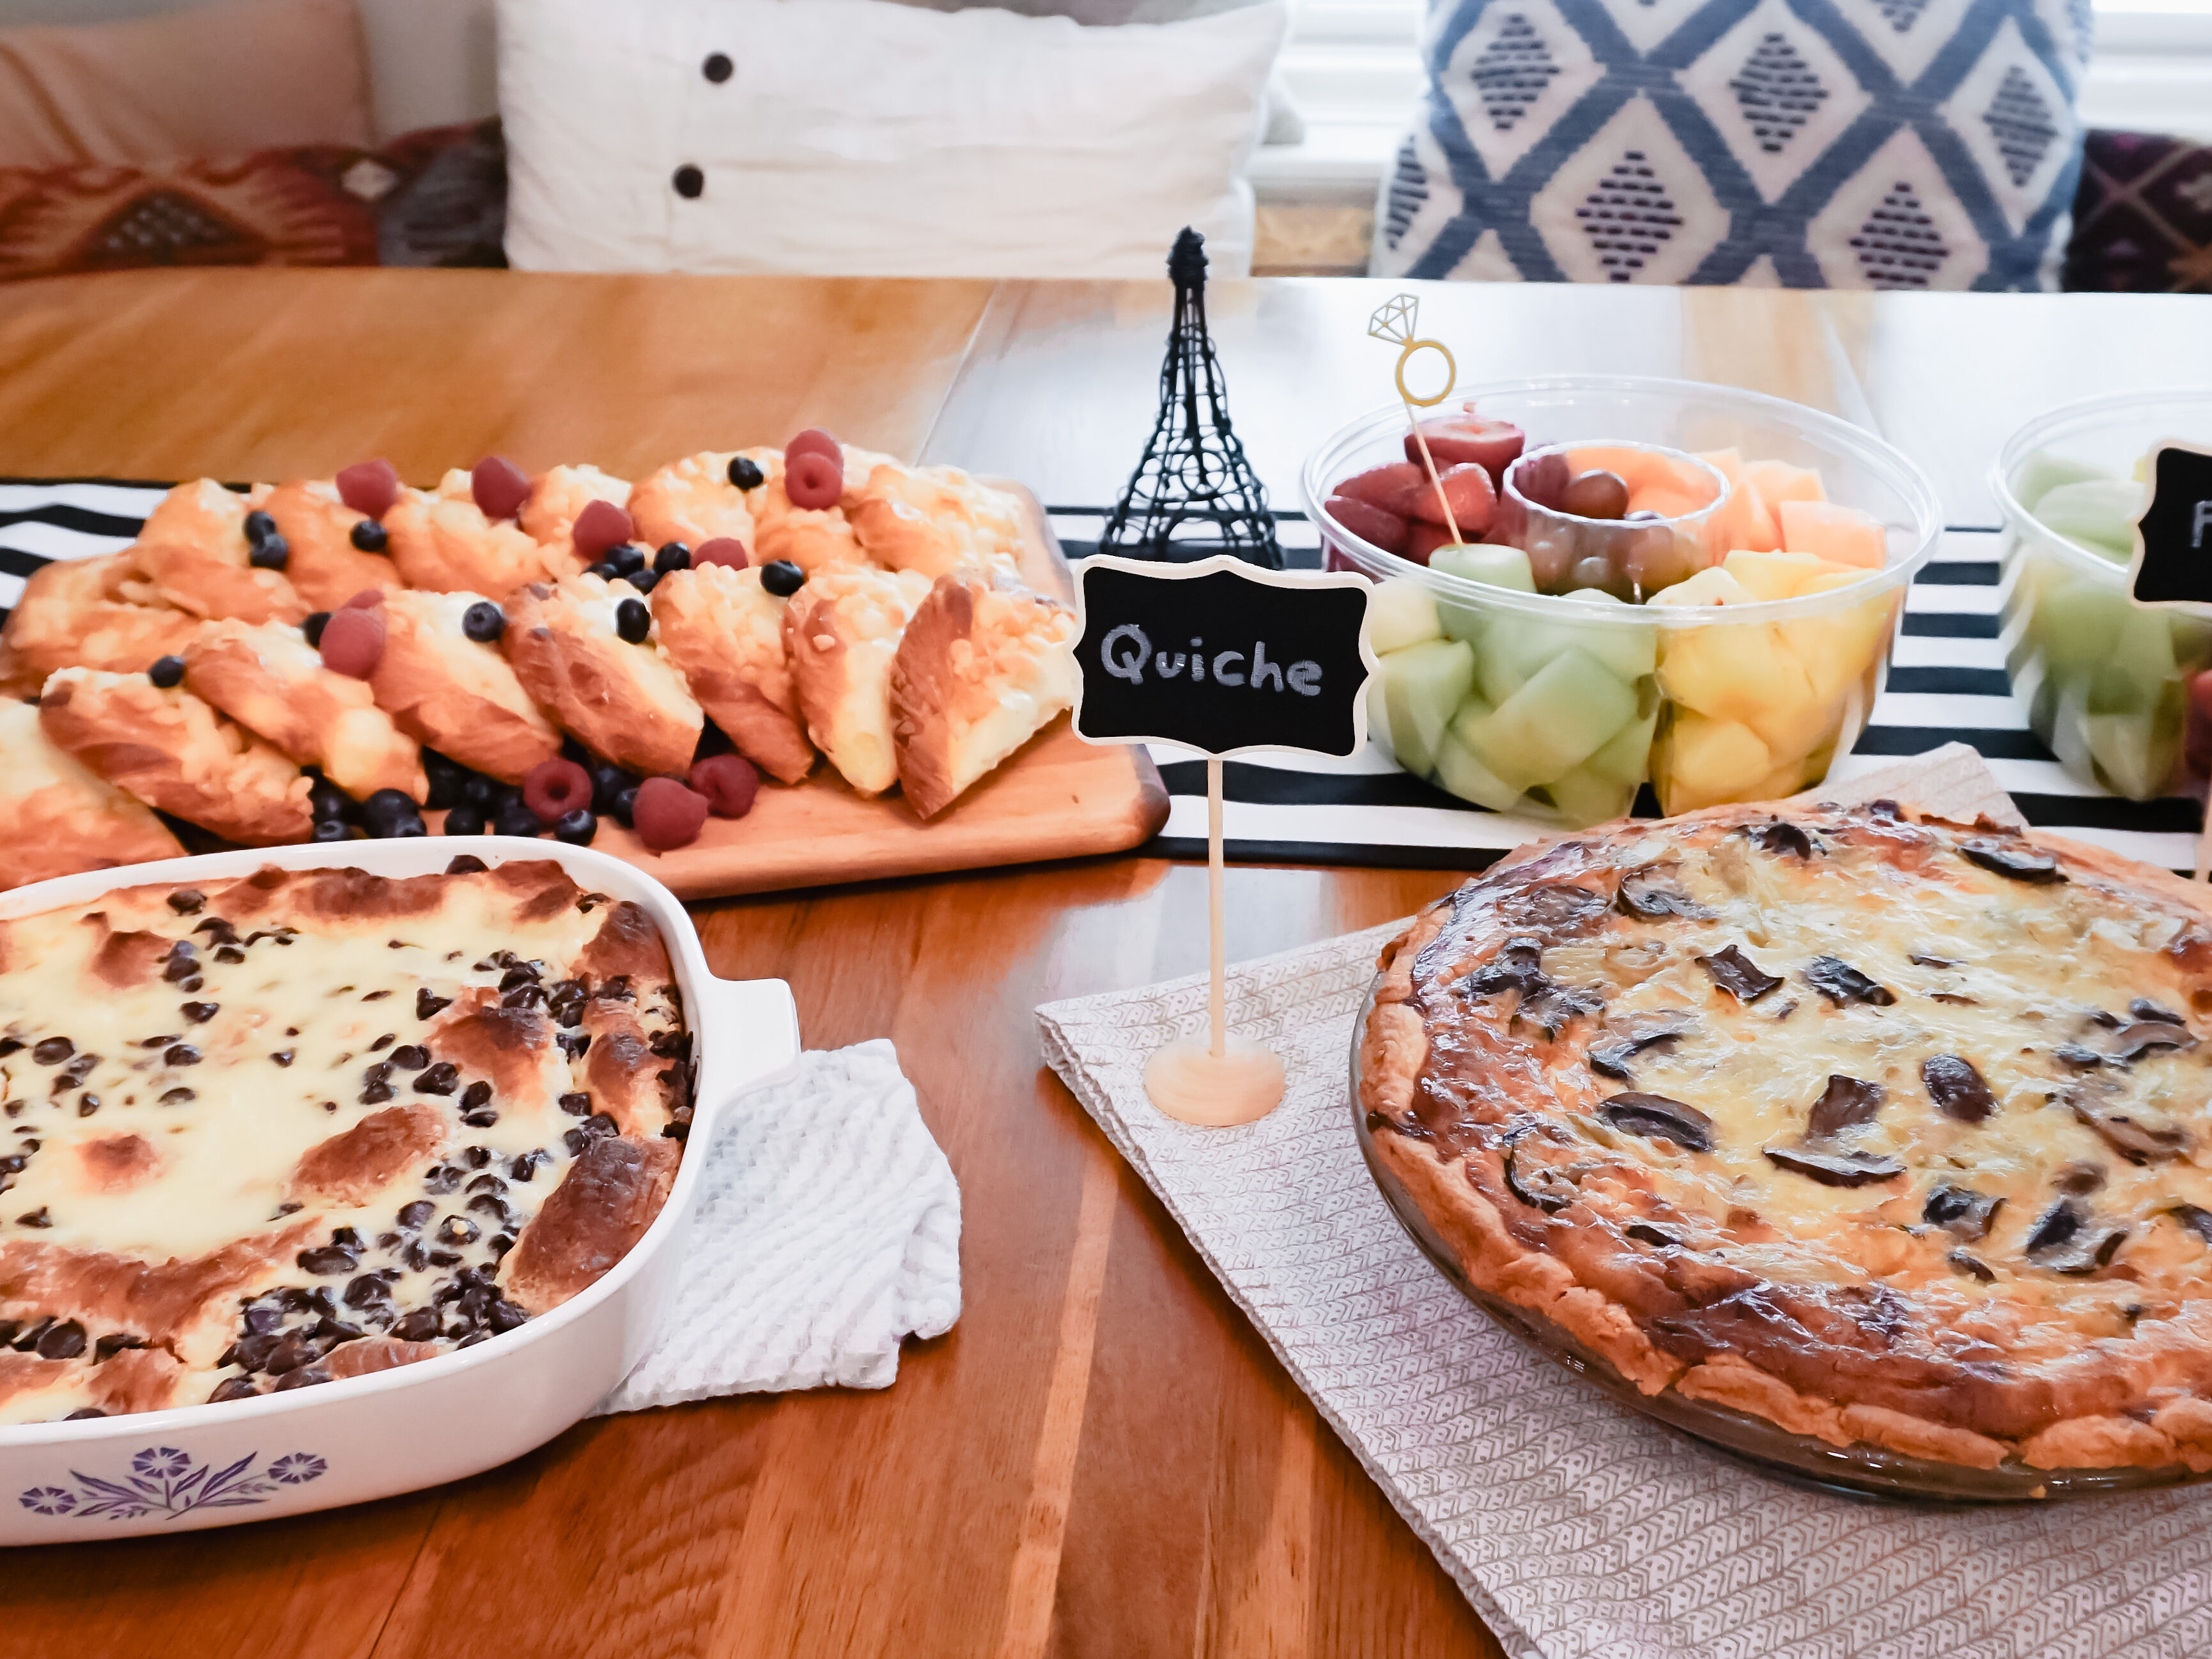 Chocolate croissant breakfast bake, danishes, quiche and fruit on a table with a small Eiffel Tower decoration in the back